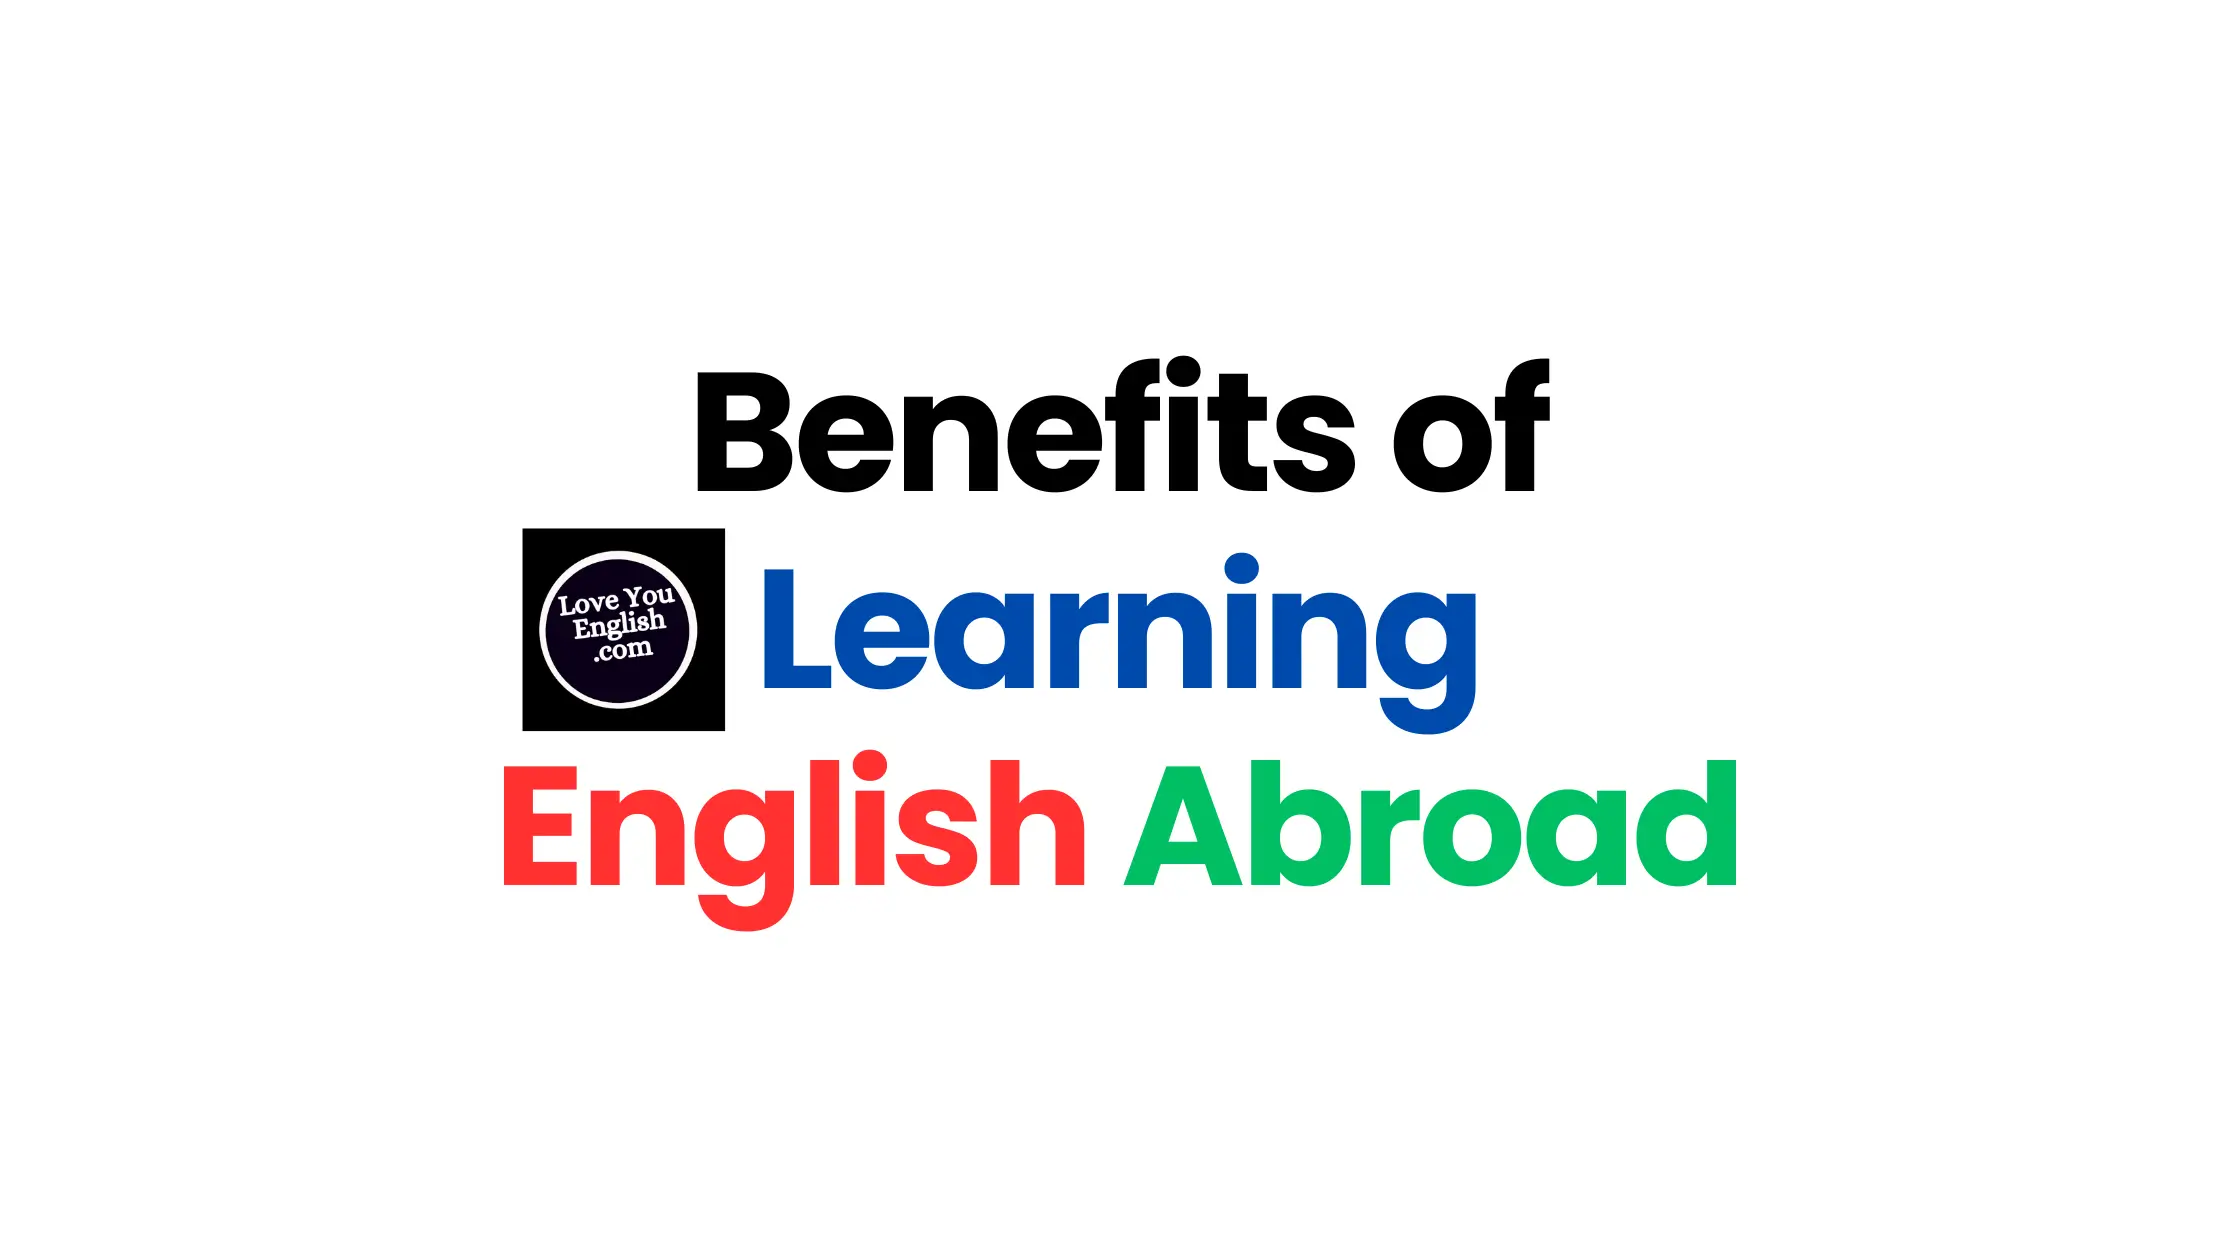 Benefits of Learning English Abroad